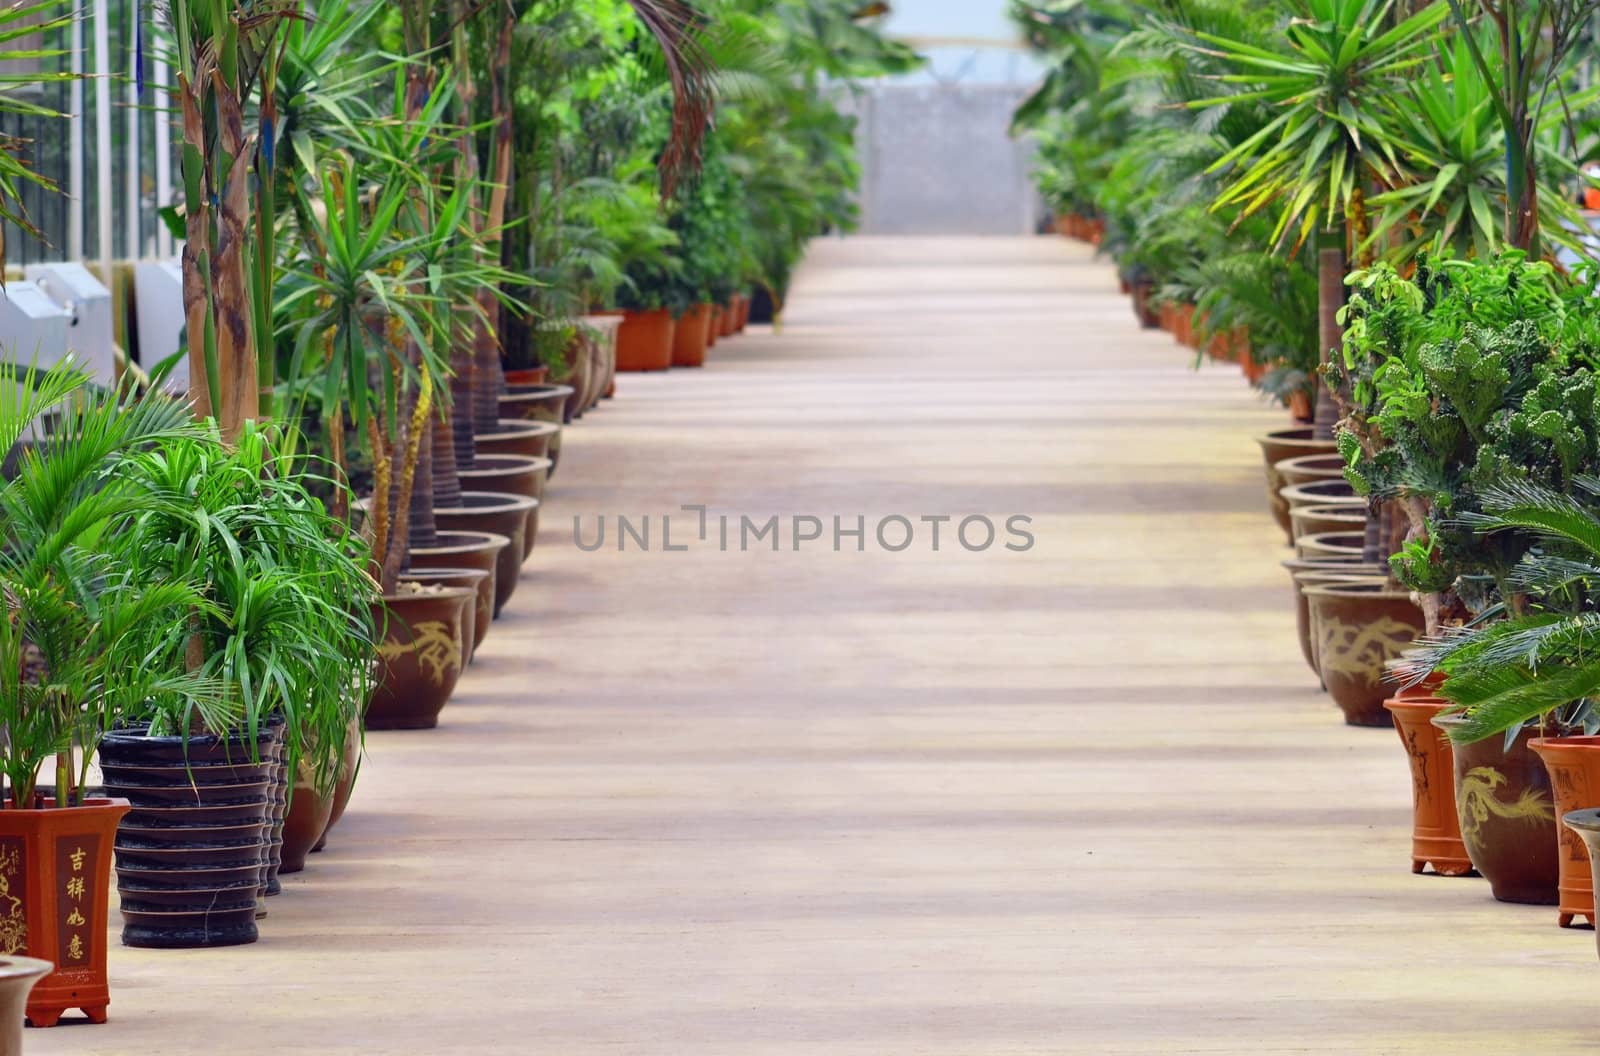 Interior of garden shop with many plants and palms around. Focus on first plan.